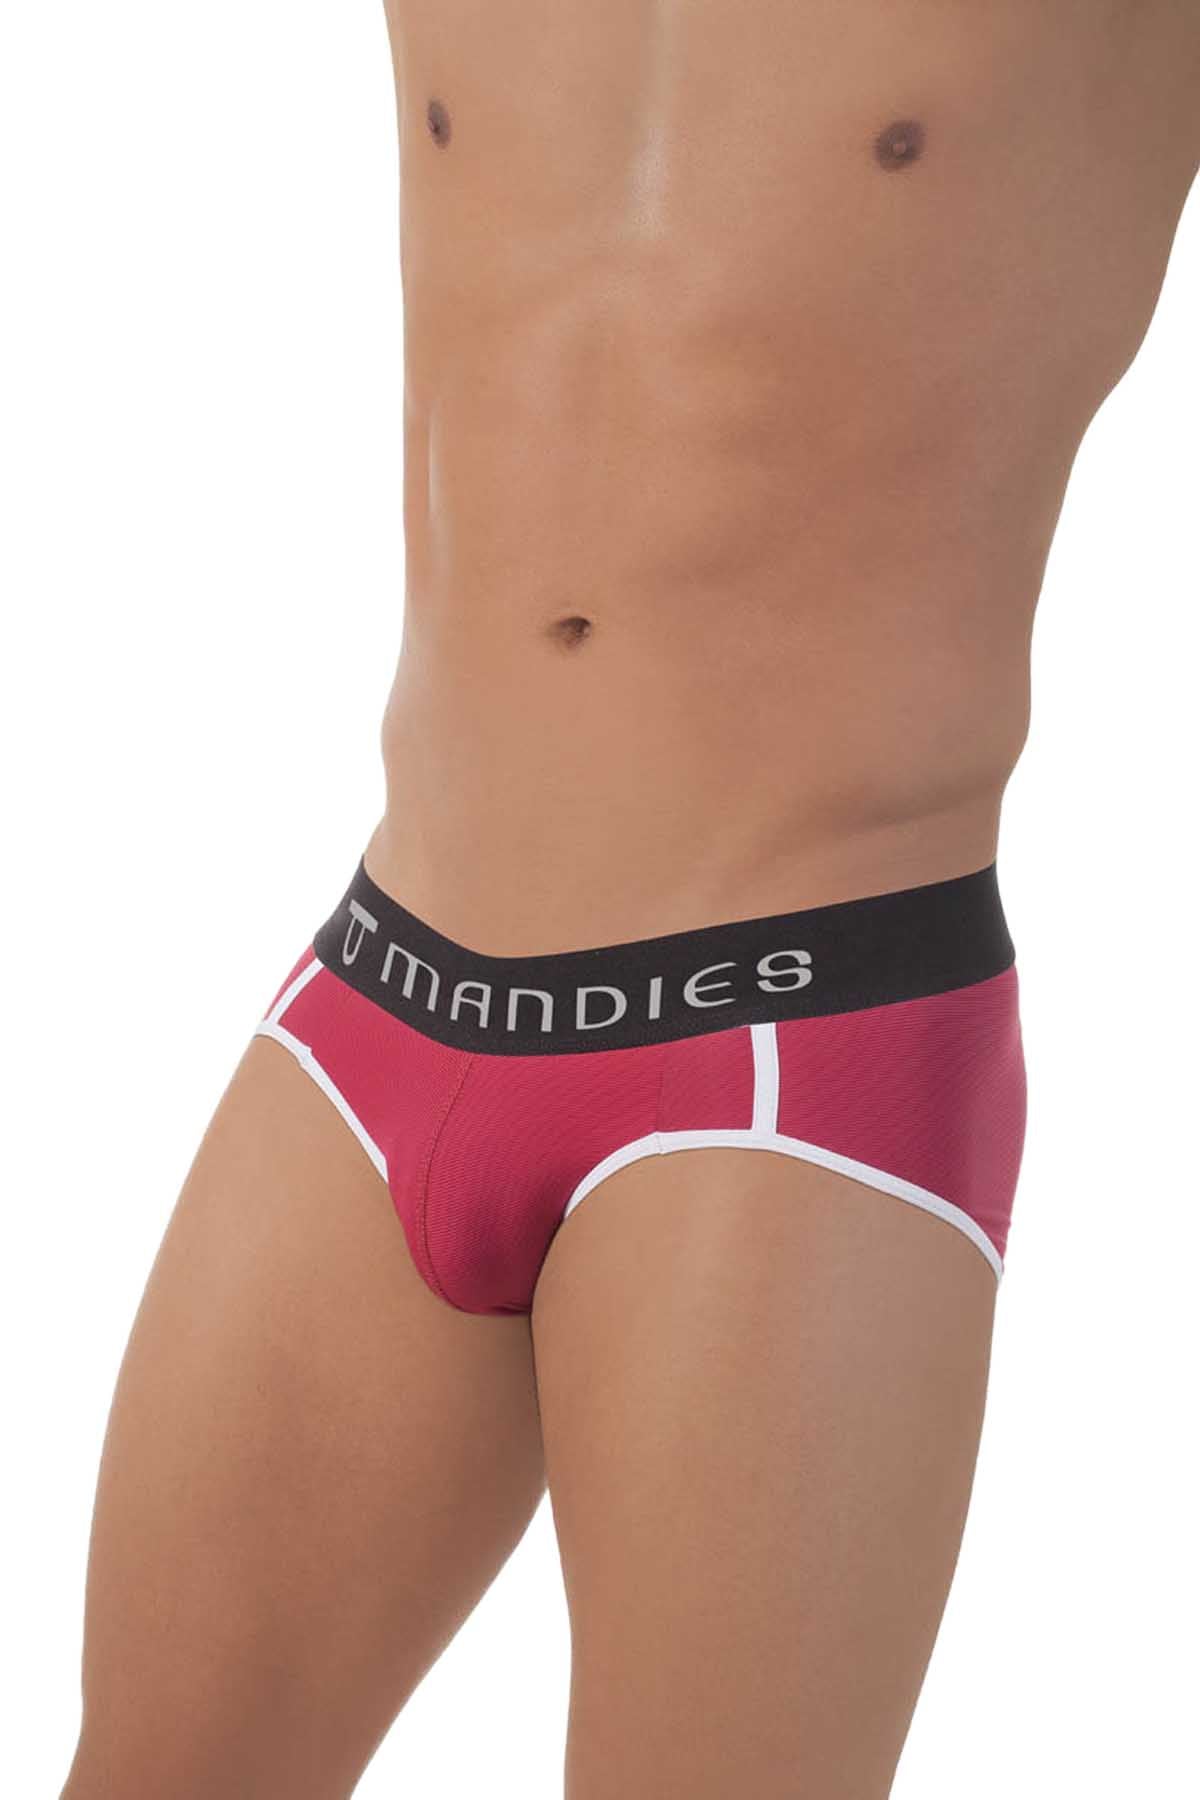 Mandies Red Marco-Polo Brief